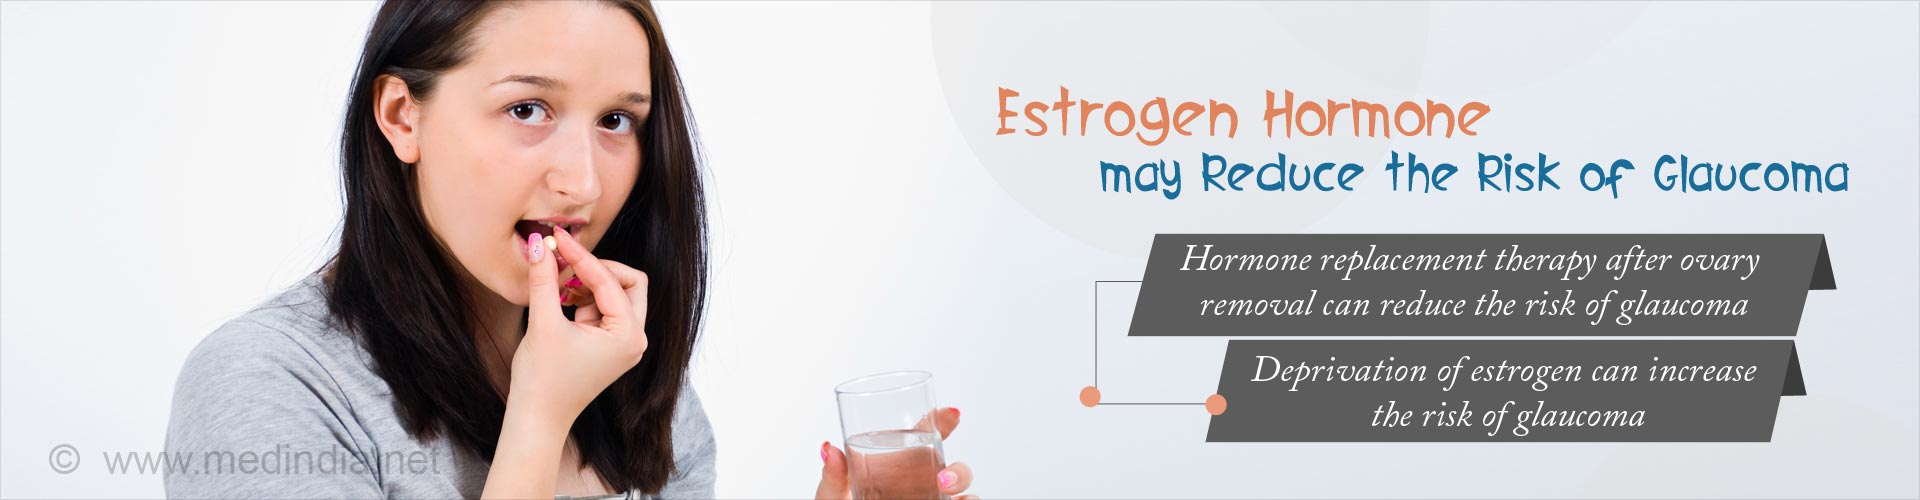 estrogen hormone may reduce the risk of glaucoma
- hormone replacement therapy after ovary removal can reduce the risk of glaucoma
- deprivation of estrogen can increase the risk of glaucoma